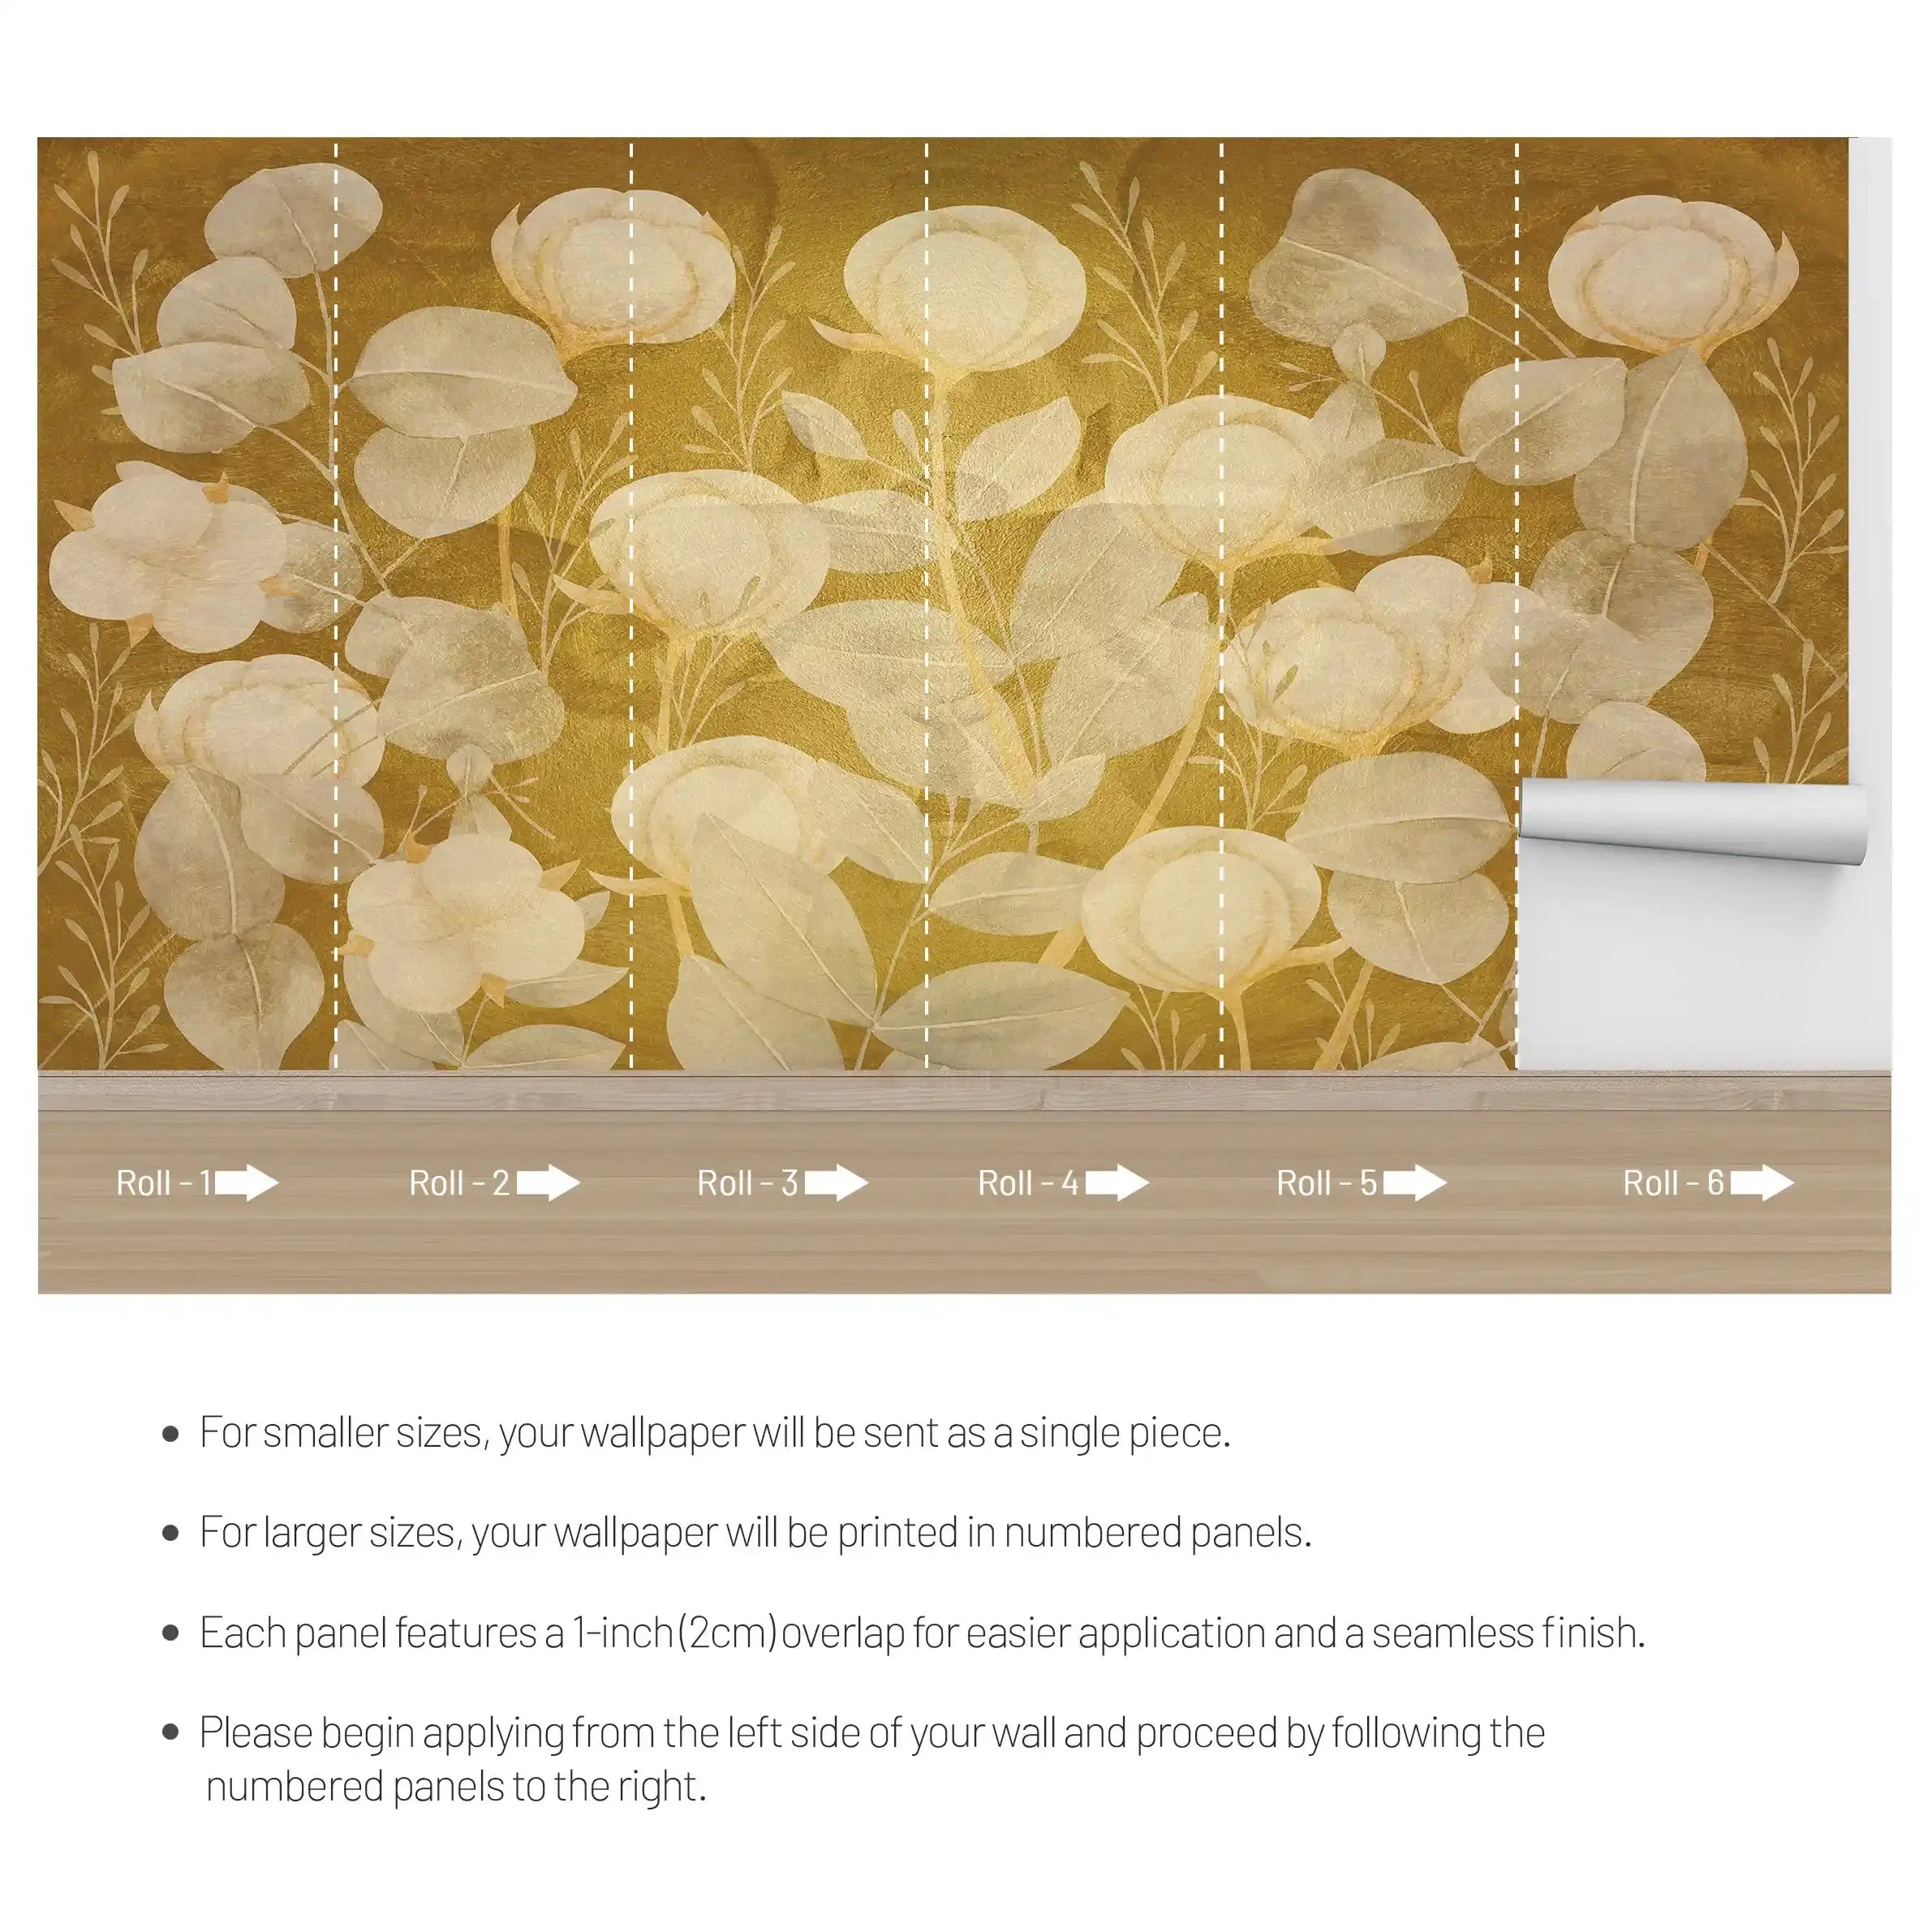 3035-E / Floral Wall Decor: Peelable, Stickable Wallpaper with Tulips Design on Gold Background, Ideal for Room Decor - Artevella